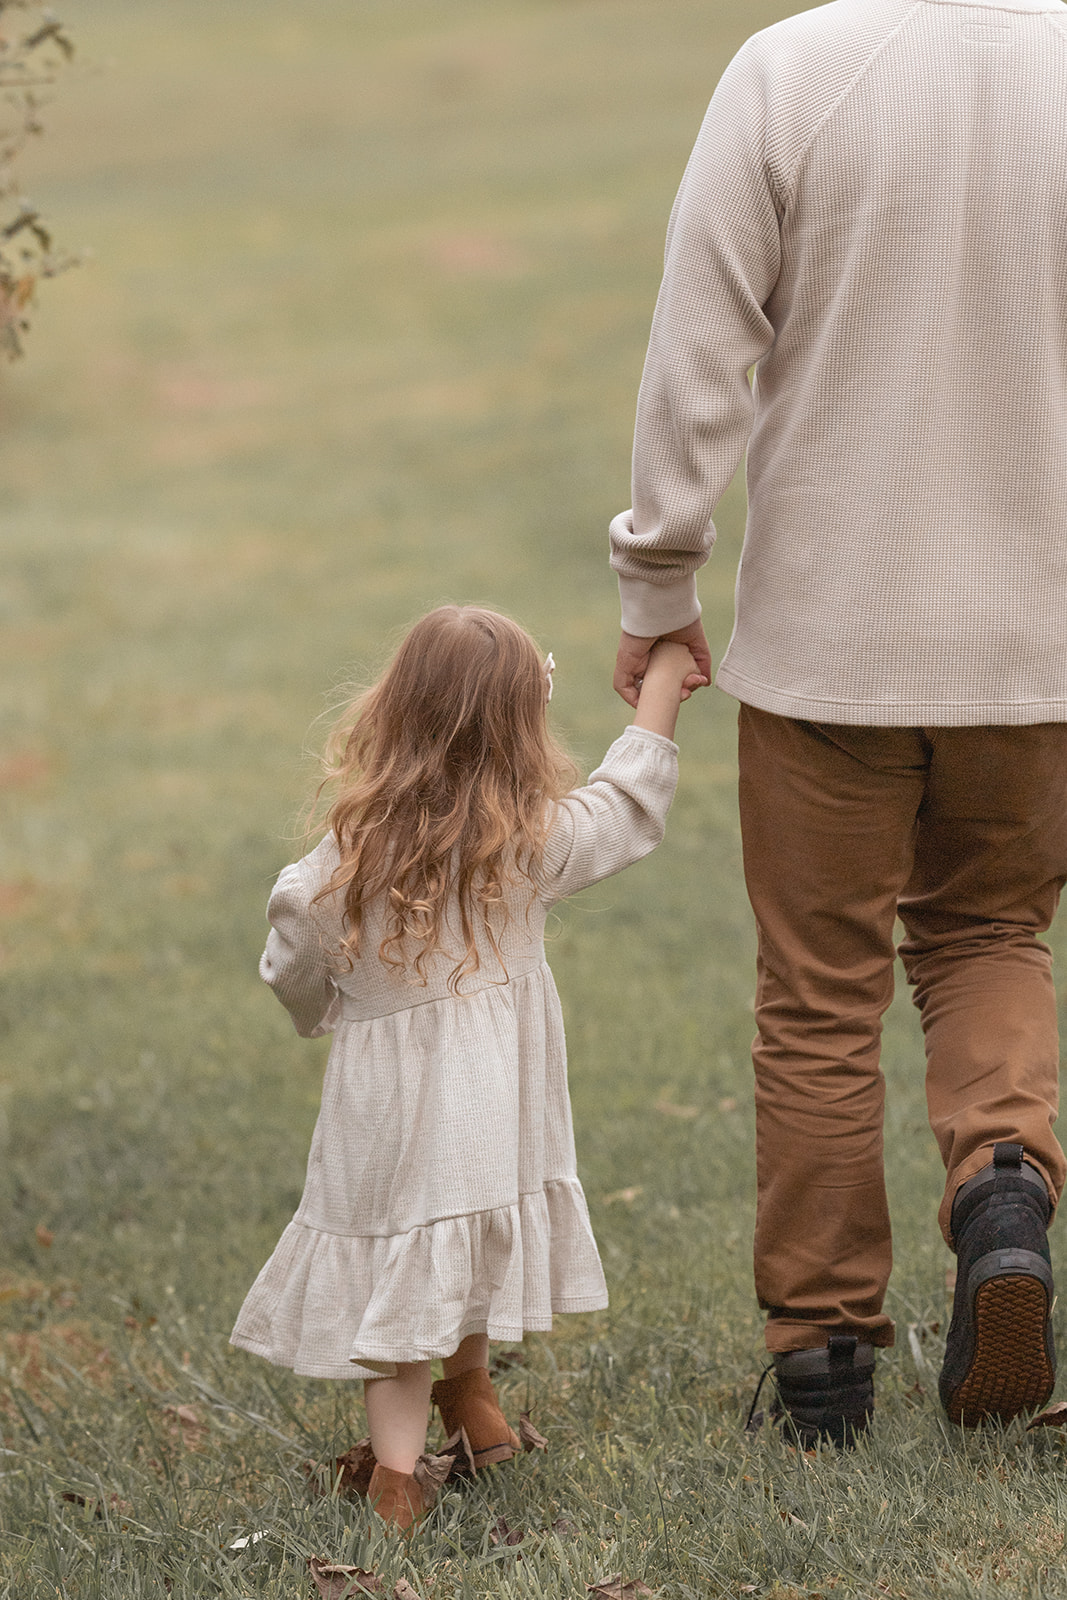 A young girl in a white dress walks with her dad holding hands through a grassy field after Montessori preschool Pittsburgh